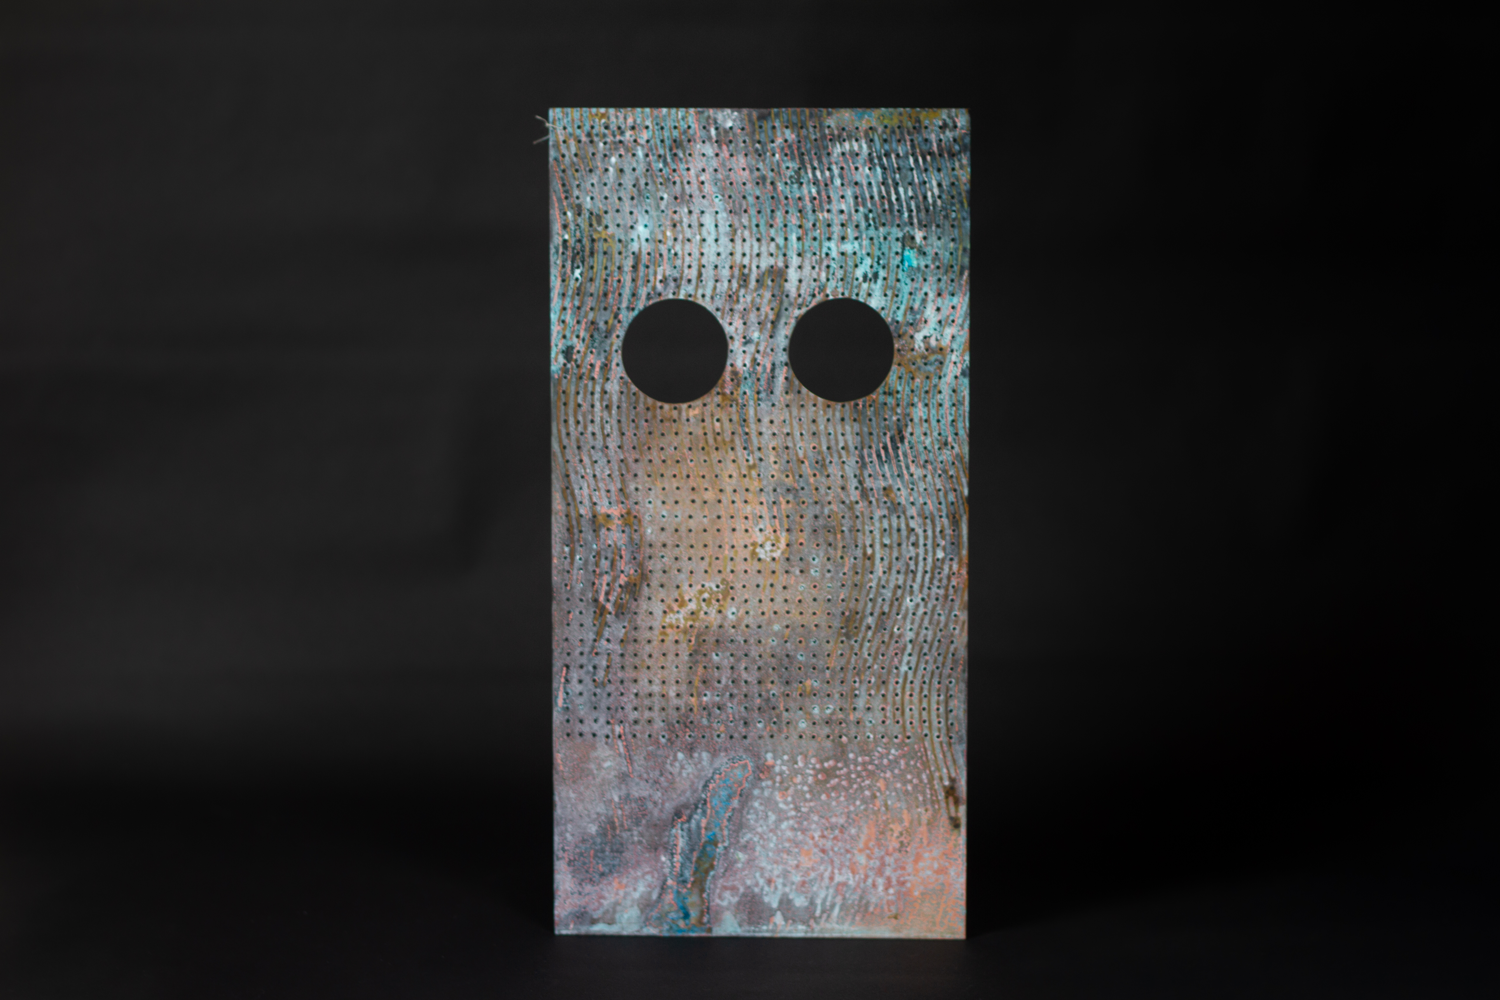 Patinated brass sheet with eye holes cut out